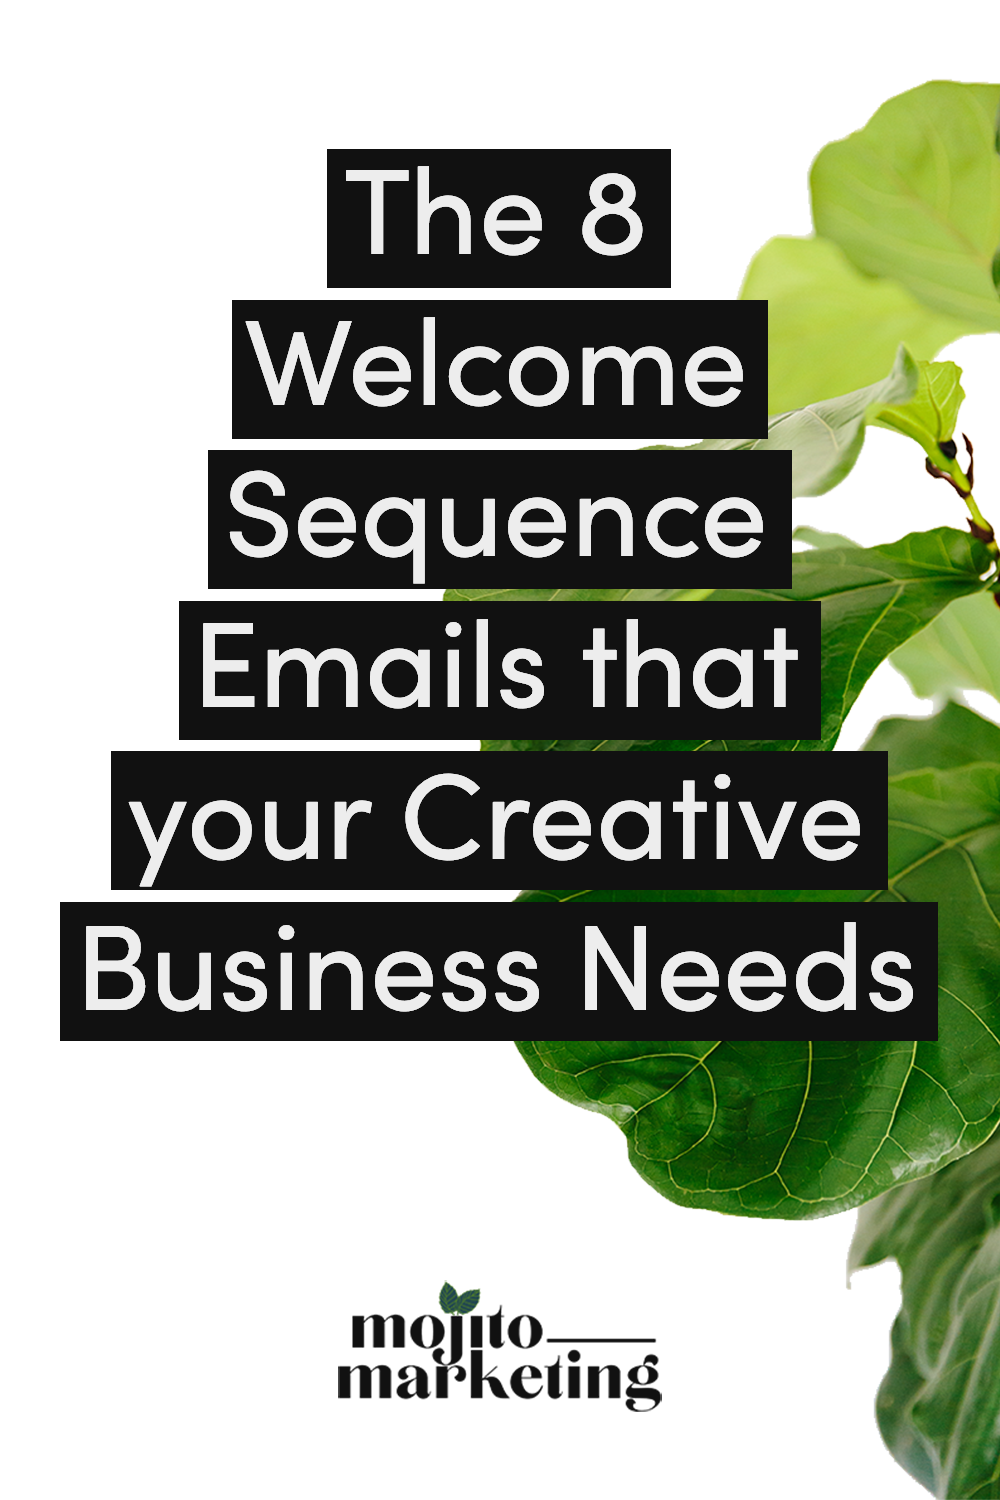 The_8_Welcome_Sequence_Emails_that_your_Creative_Business_Needs_C.png